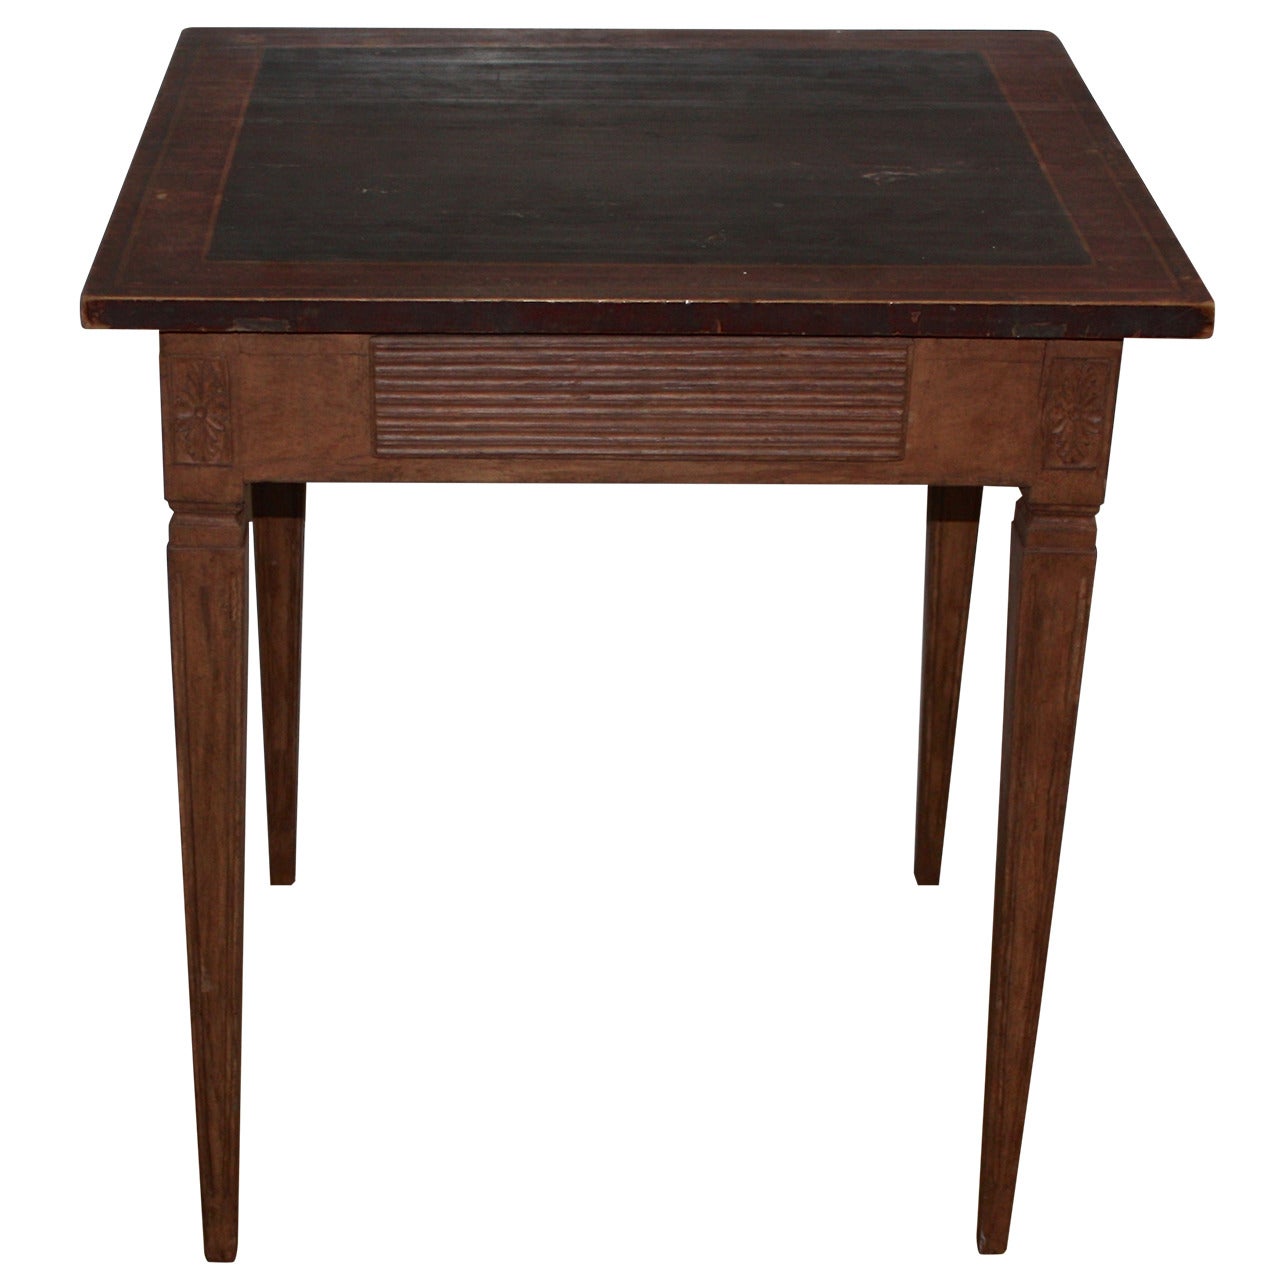 19th Century Gustavian Side Table or Small Writing Desk